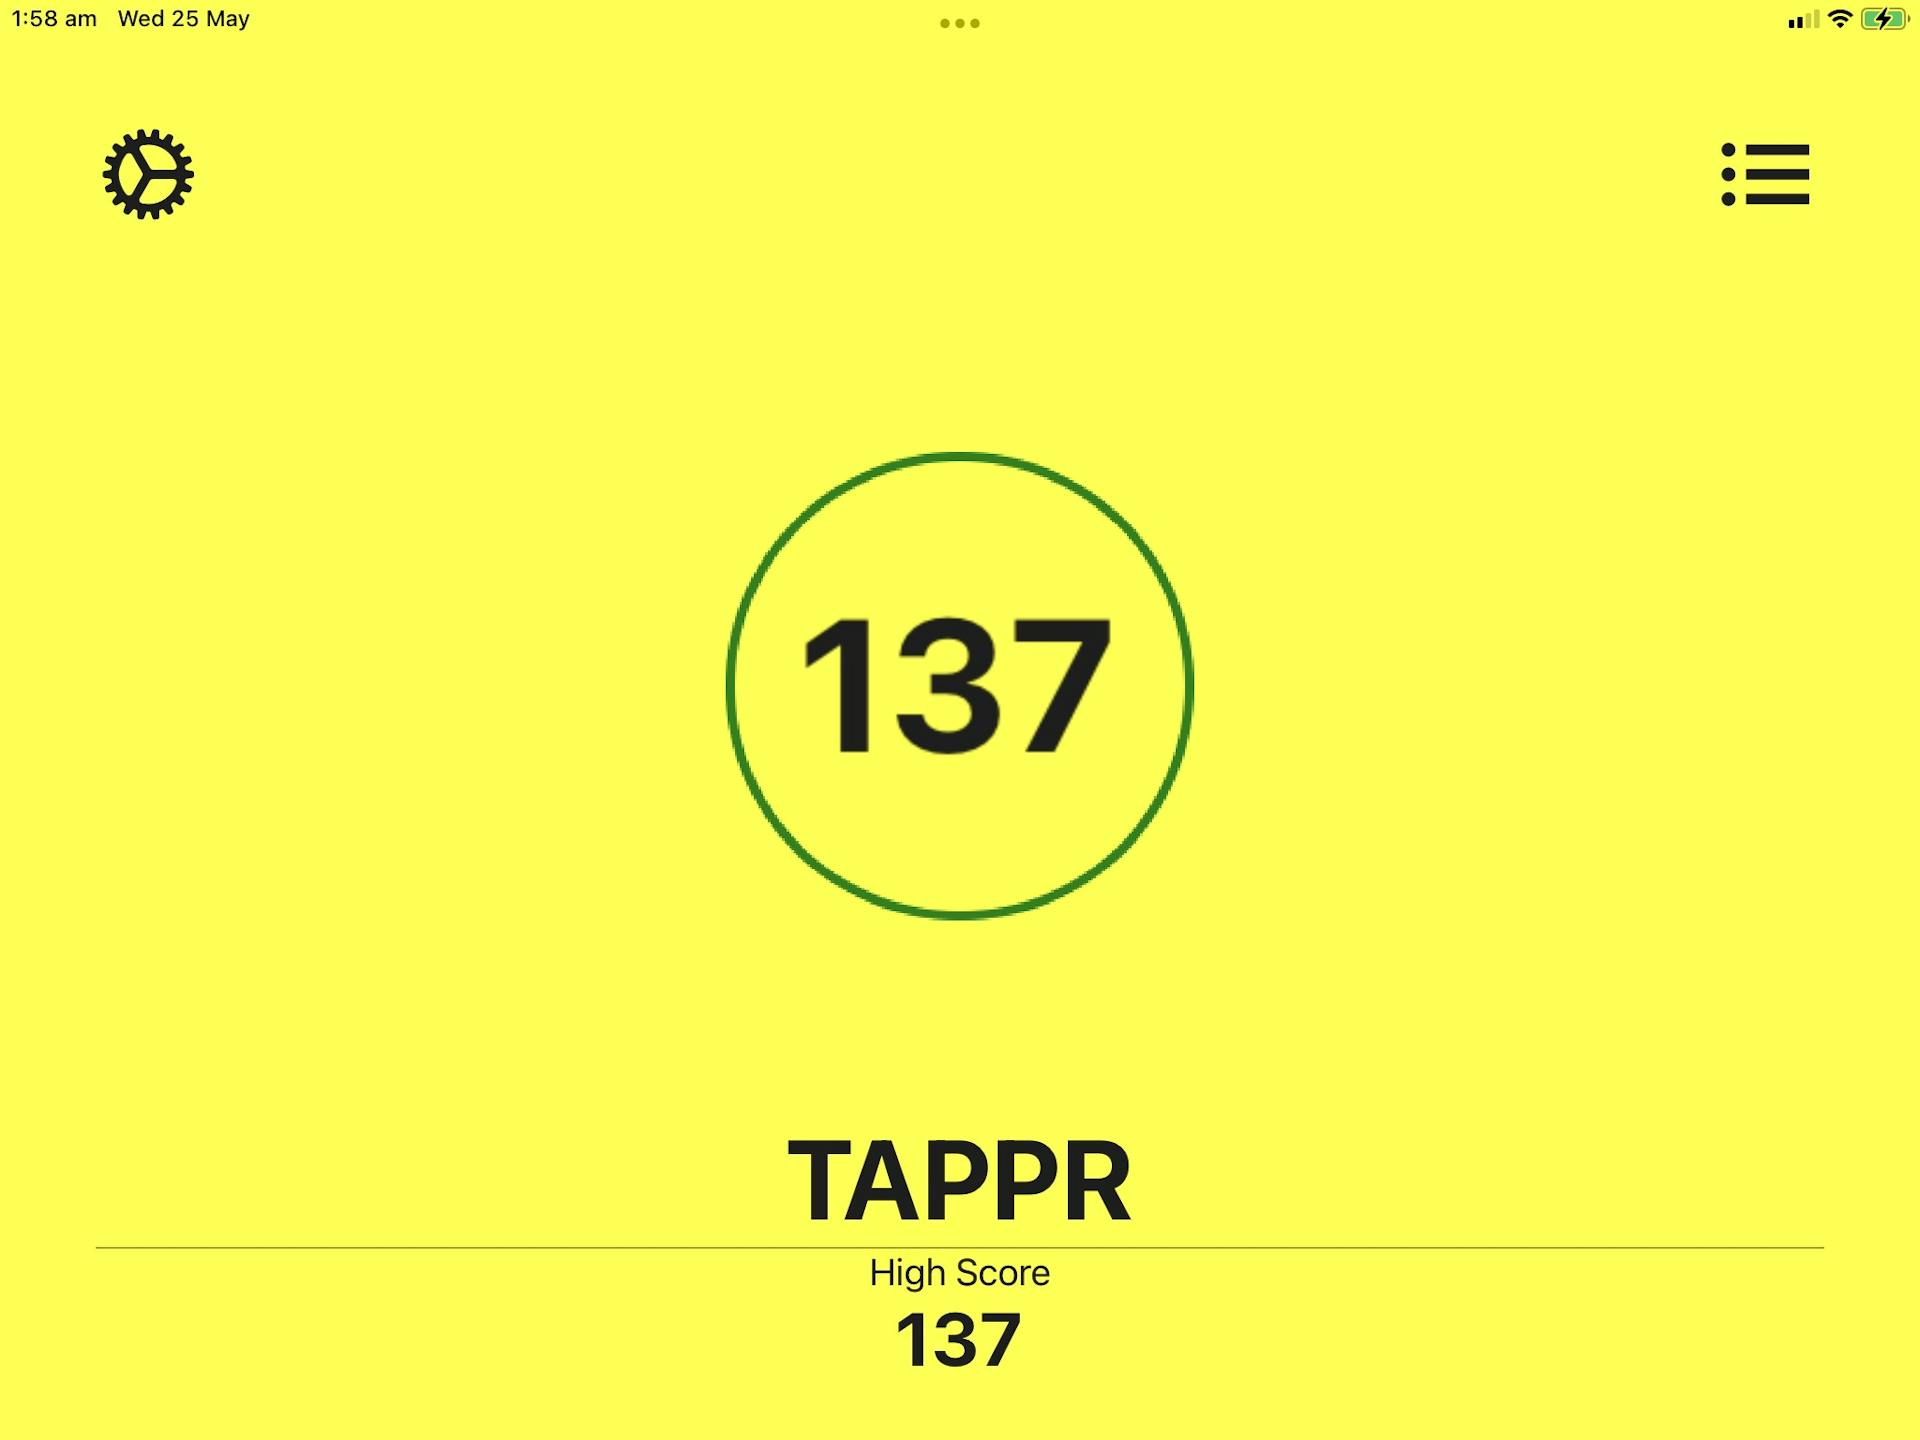 Tappr Released!